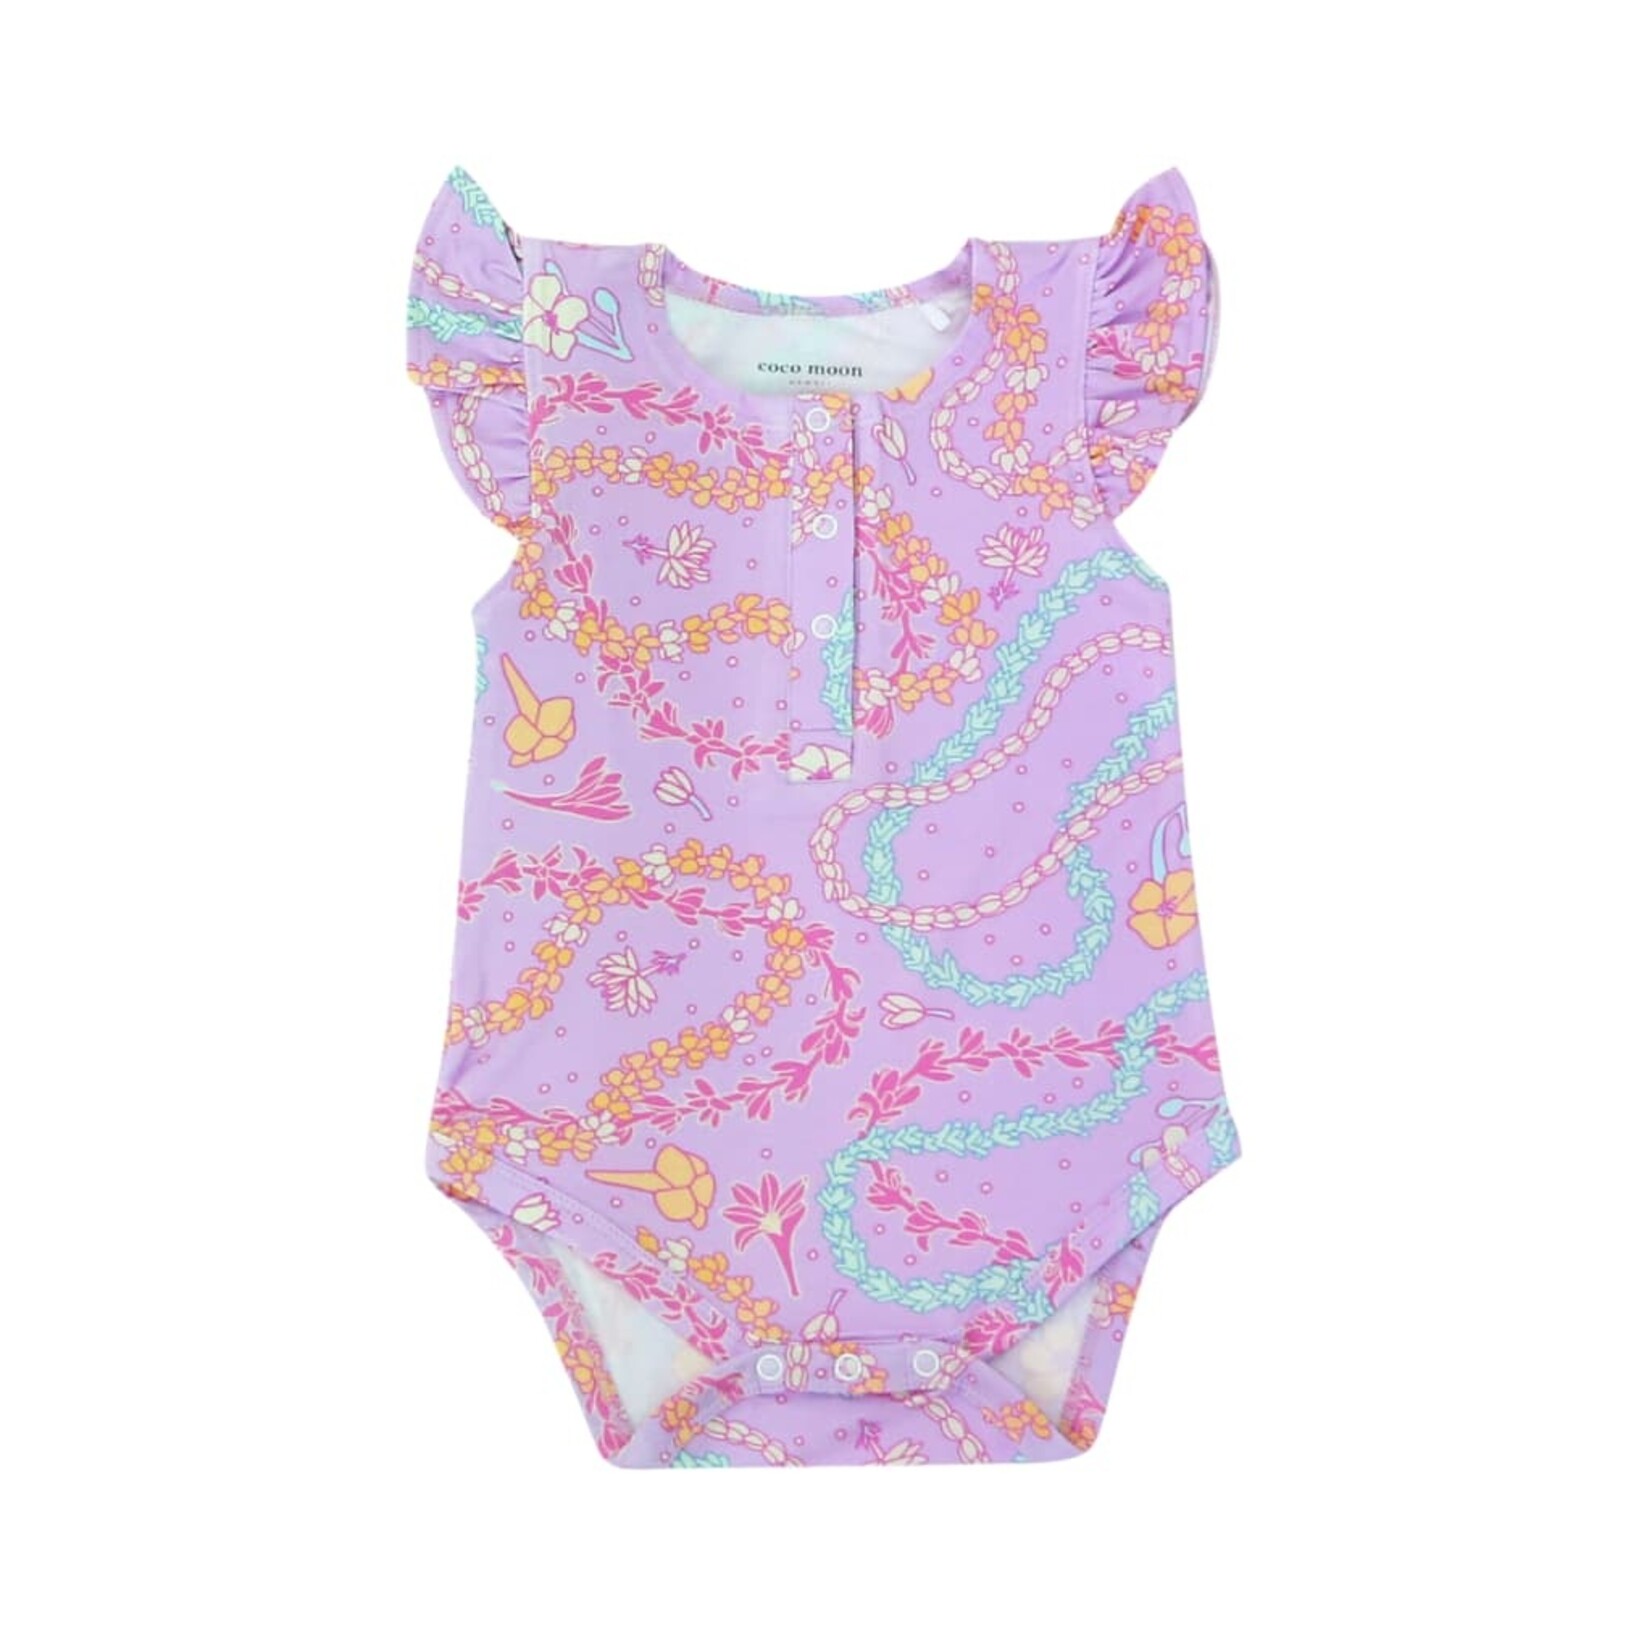 Coco Moon Coco Moon: Lei Day Bamboo Flutter Sleeve Onesie